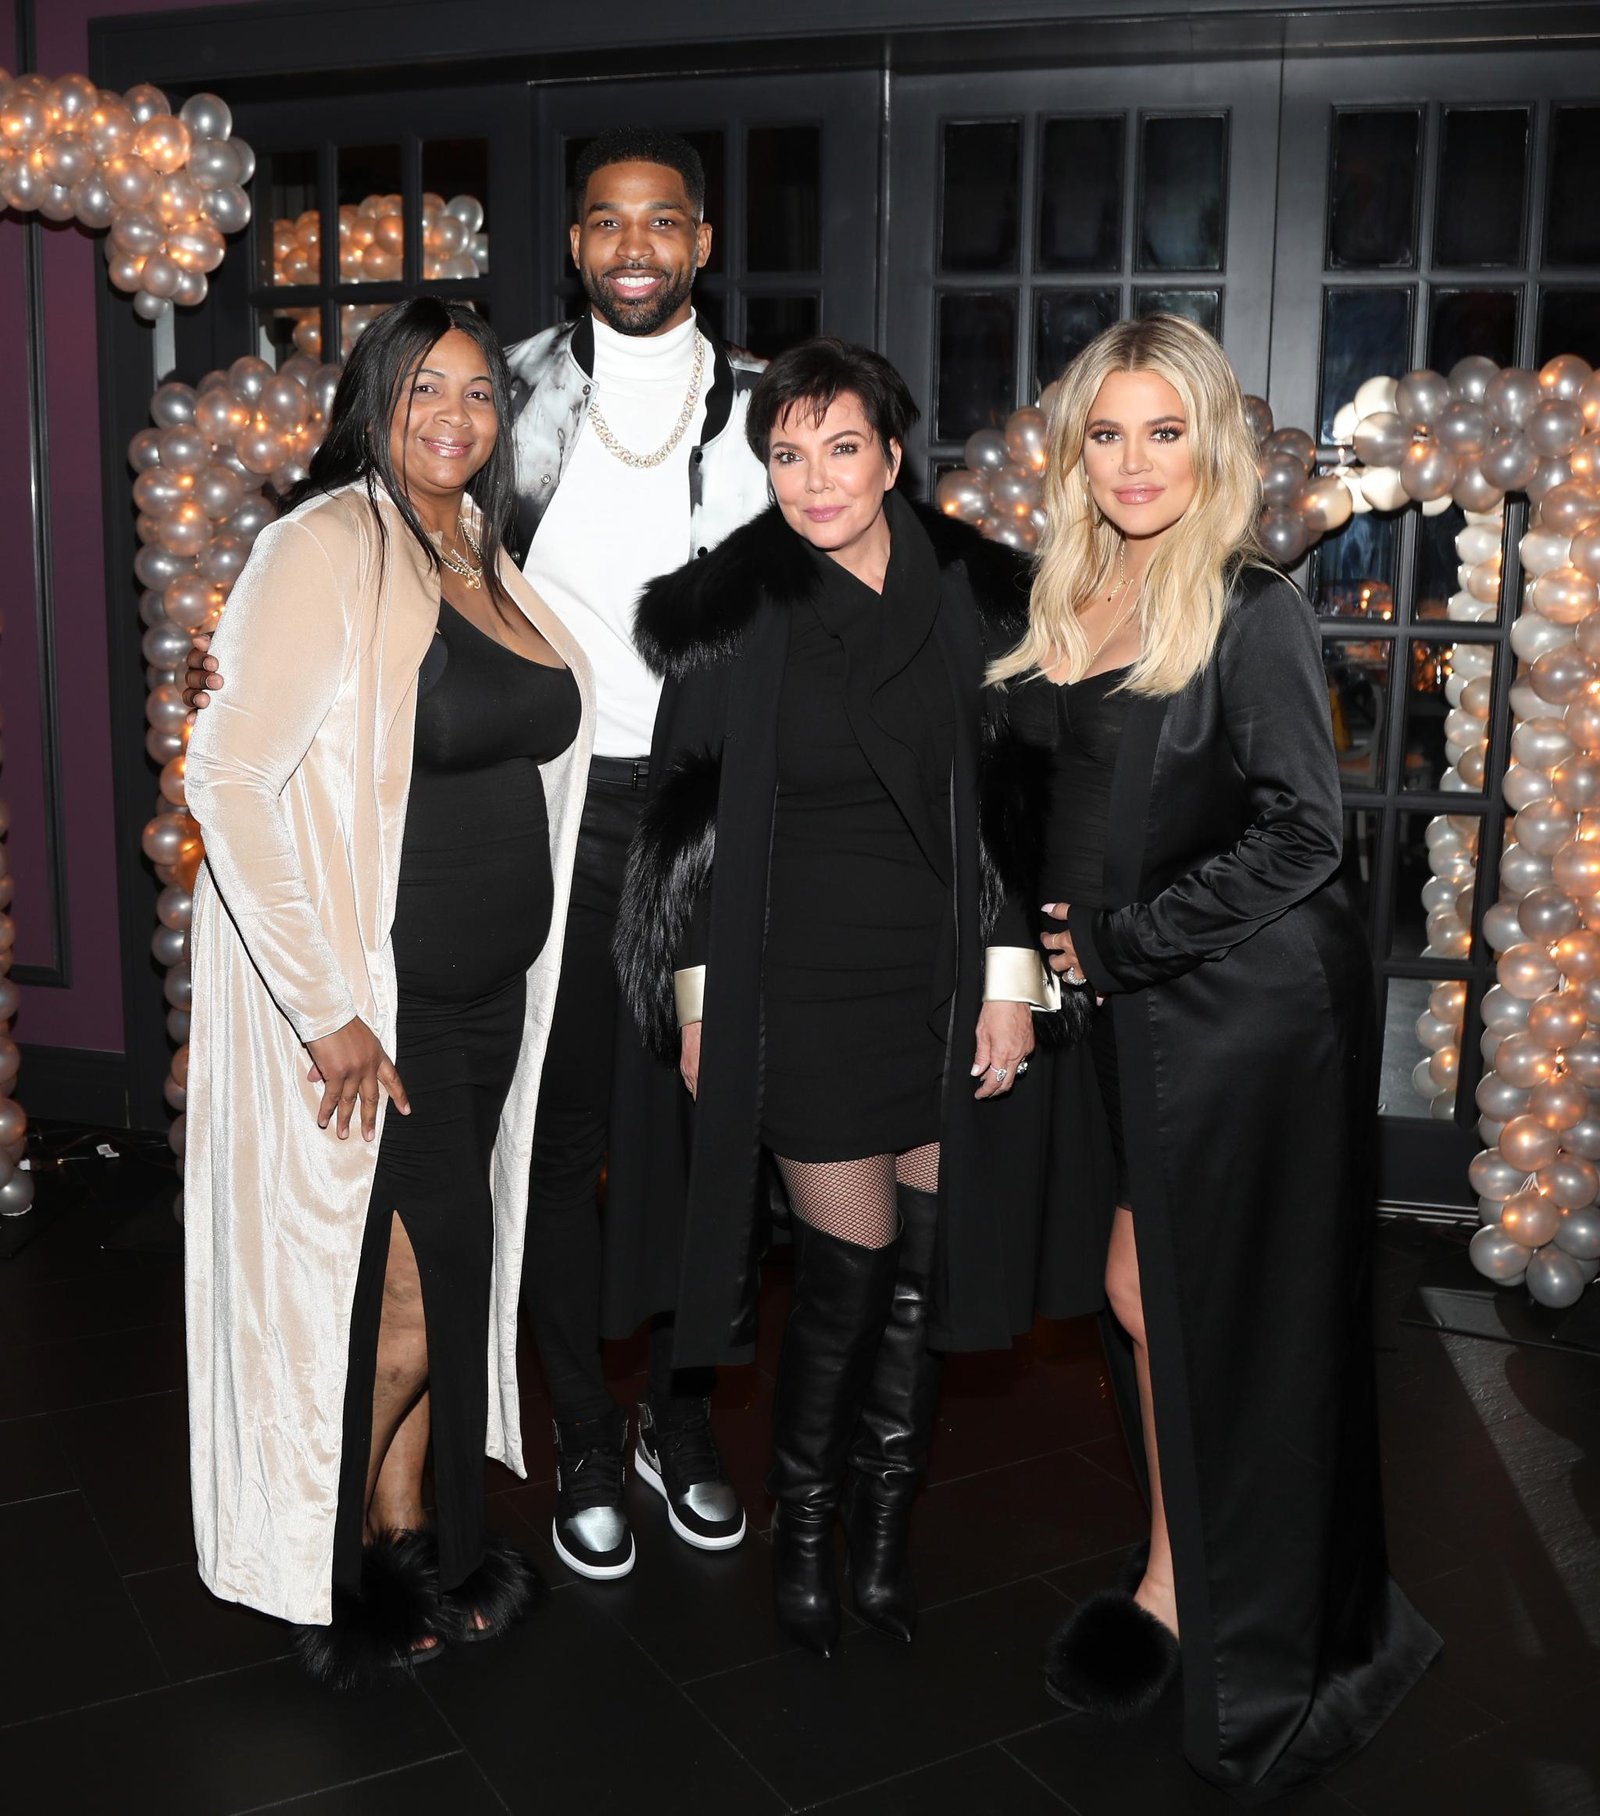 Andrea Thompson, Tristan Thompson, Kris Jenner and Khloé Kardashian at Tristan's birthday party in 2018.